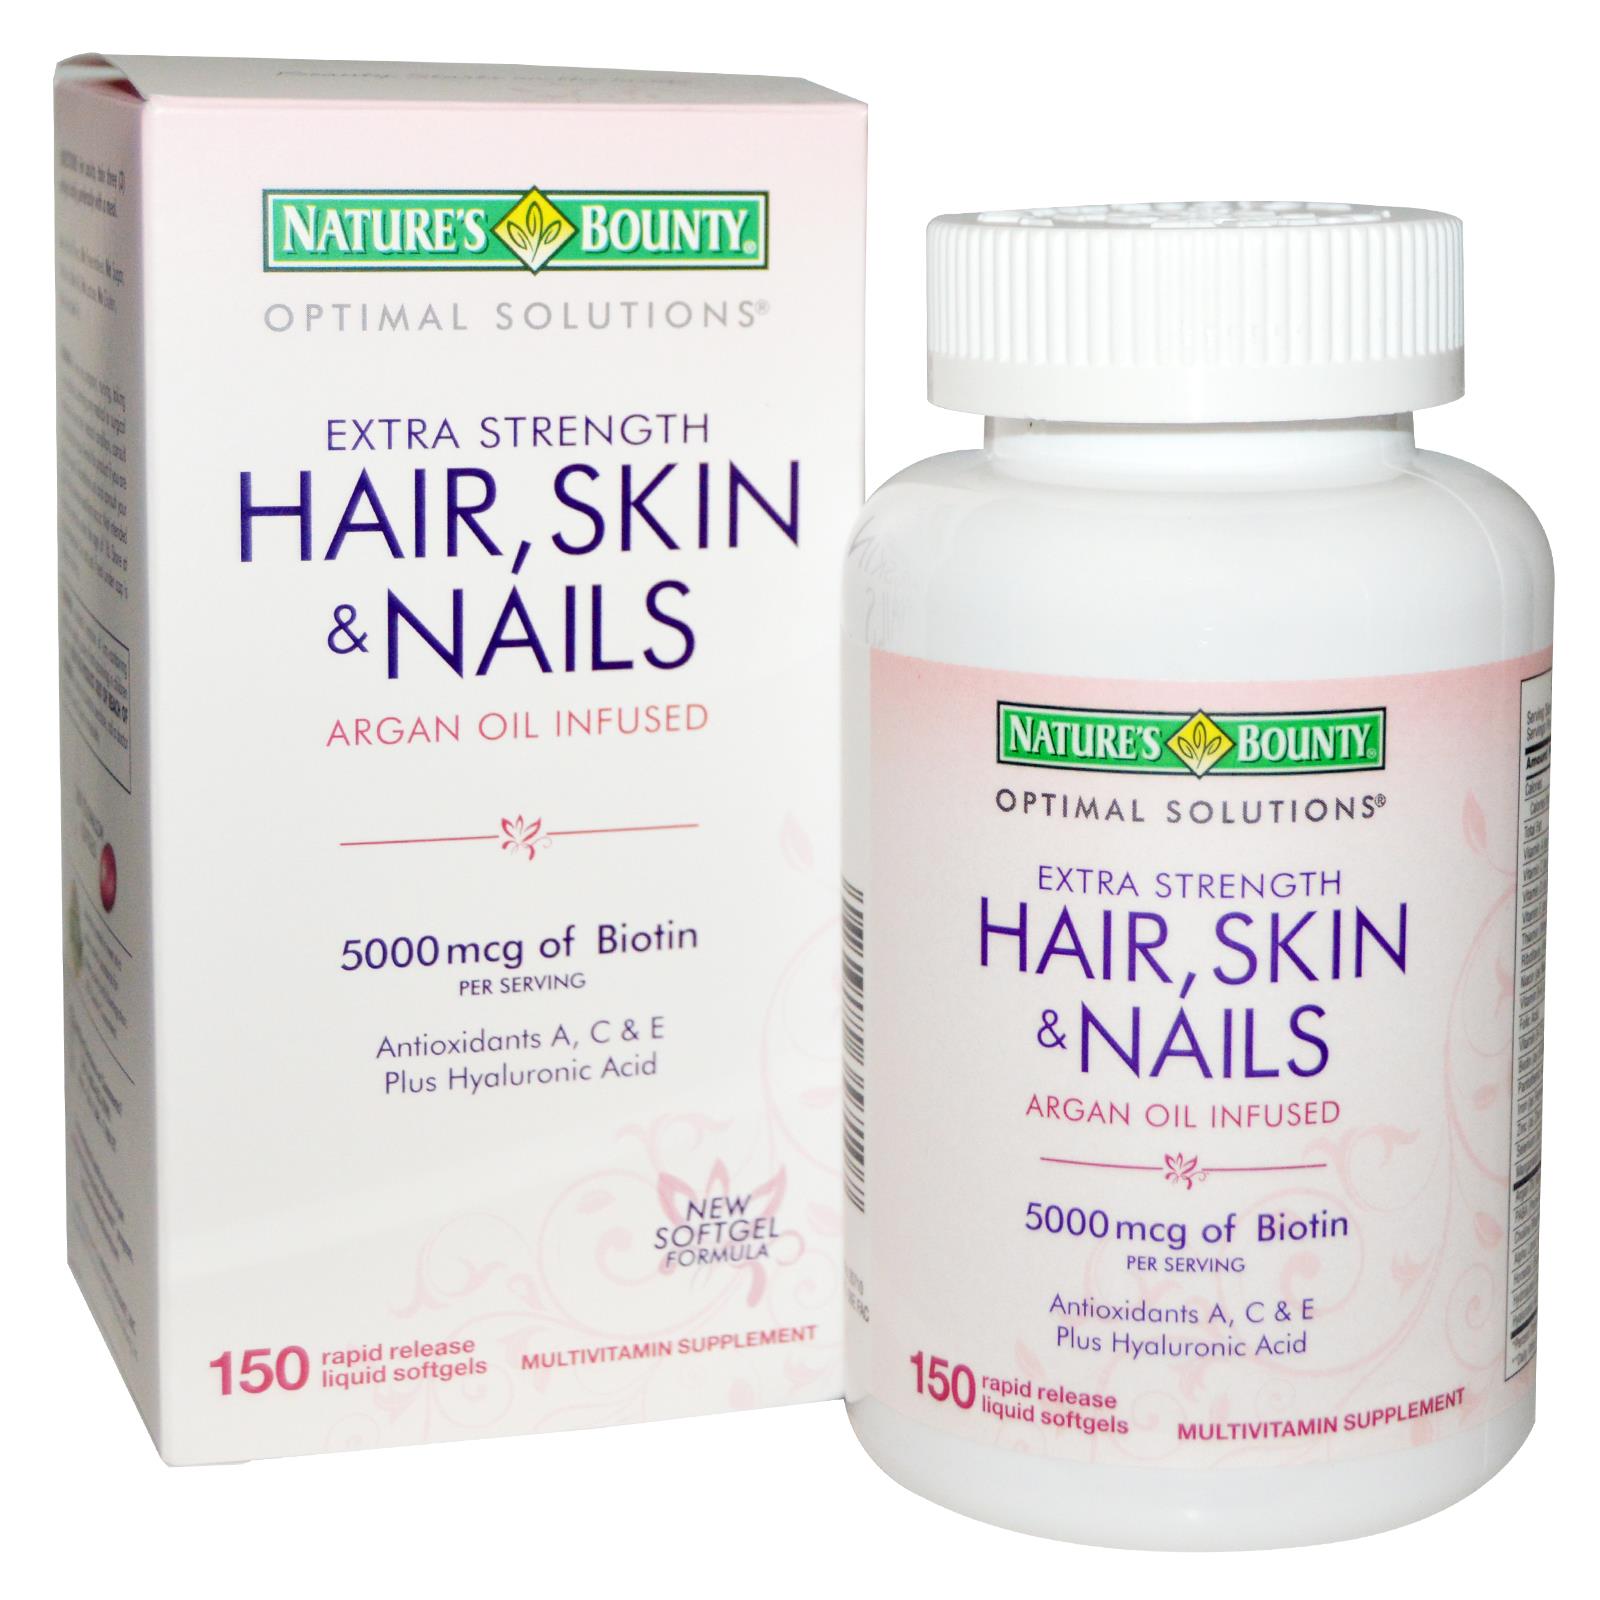 Natures Bounty Optimal Solutions Hair Skin And Nails Only 200 At